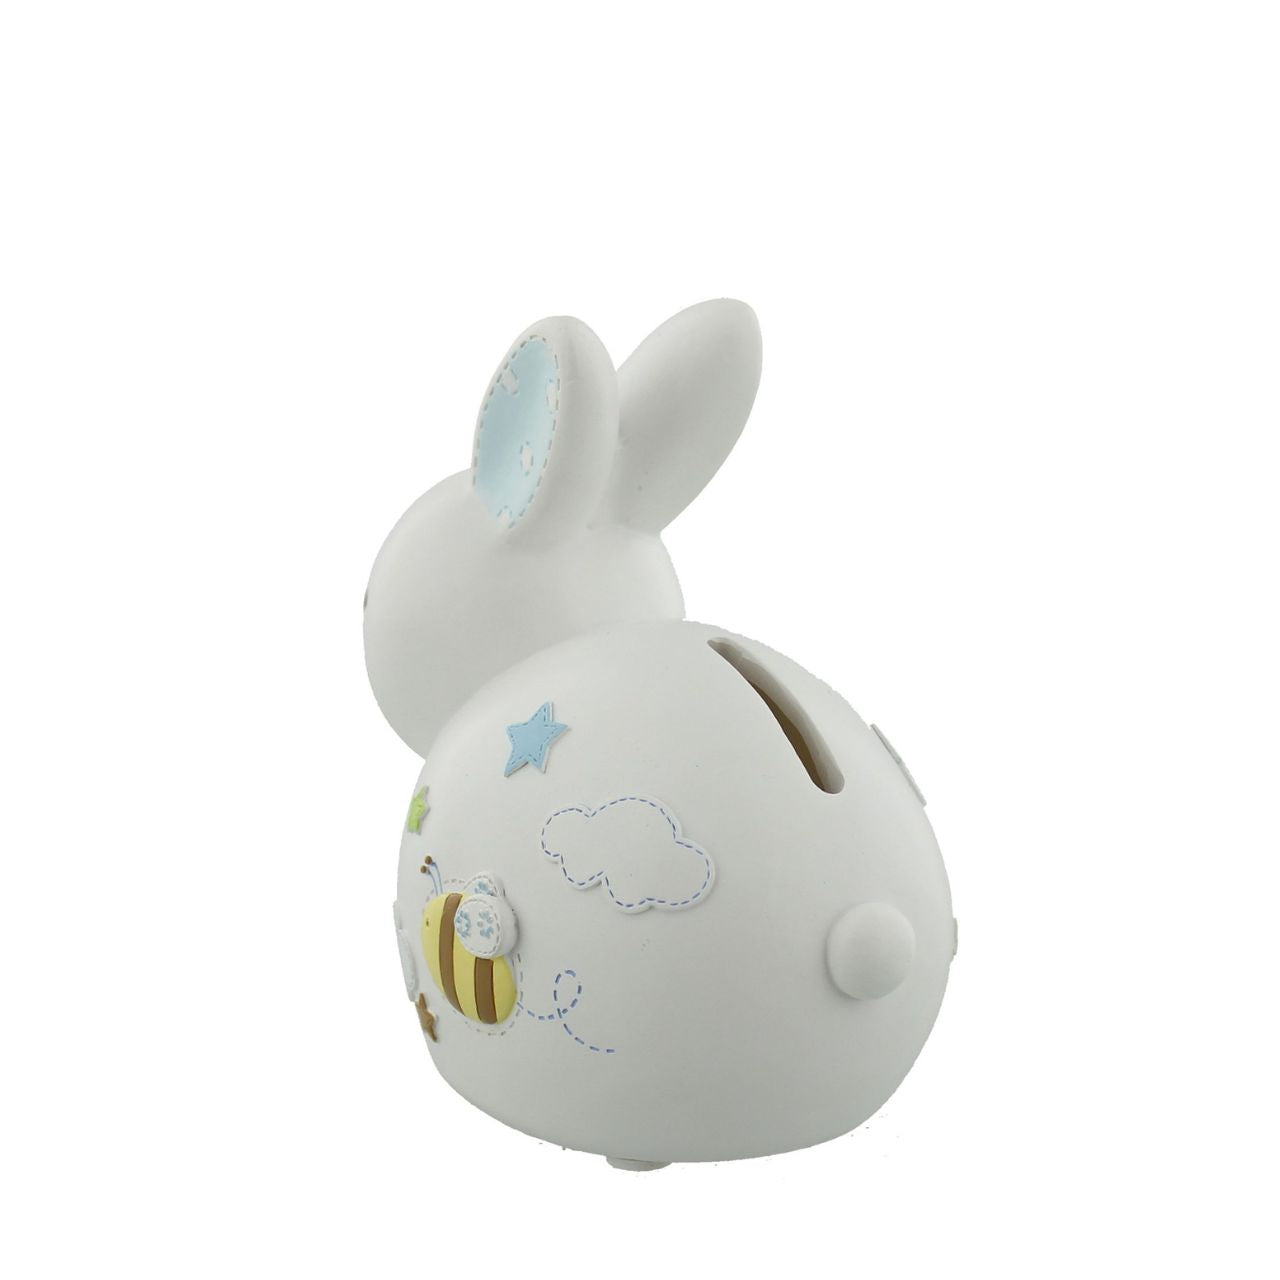 'Petit Cheri' Collection Money Box Blue Rabbit  Help a precious new arrival save for their very first rainy day with this adorable blue and white bunny rabbit money box. From the Petit Cheri Collection by CELEBRATIONS - vintage, rustic and utterly charming gifts for your little darling.